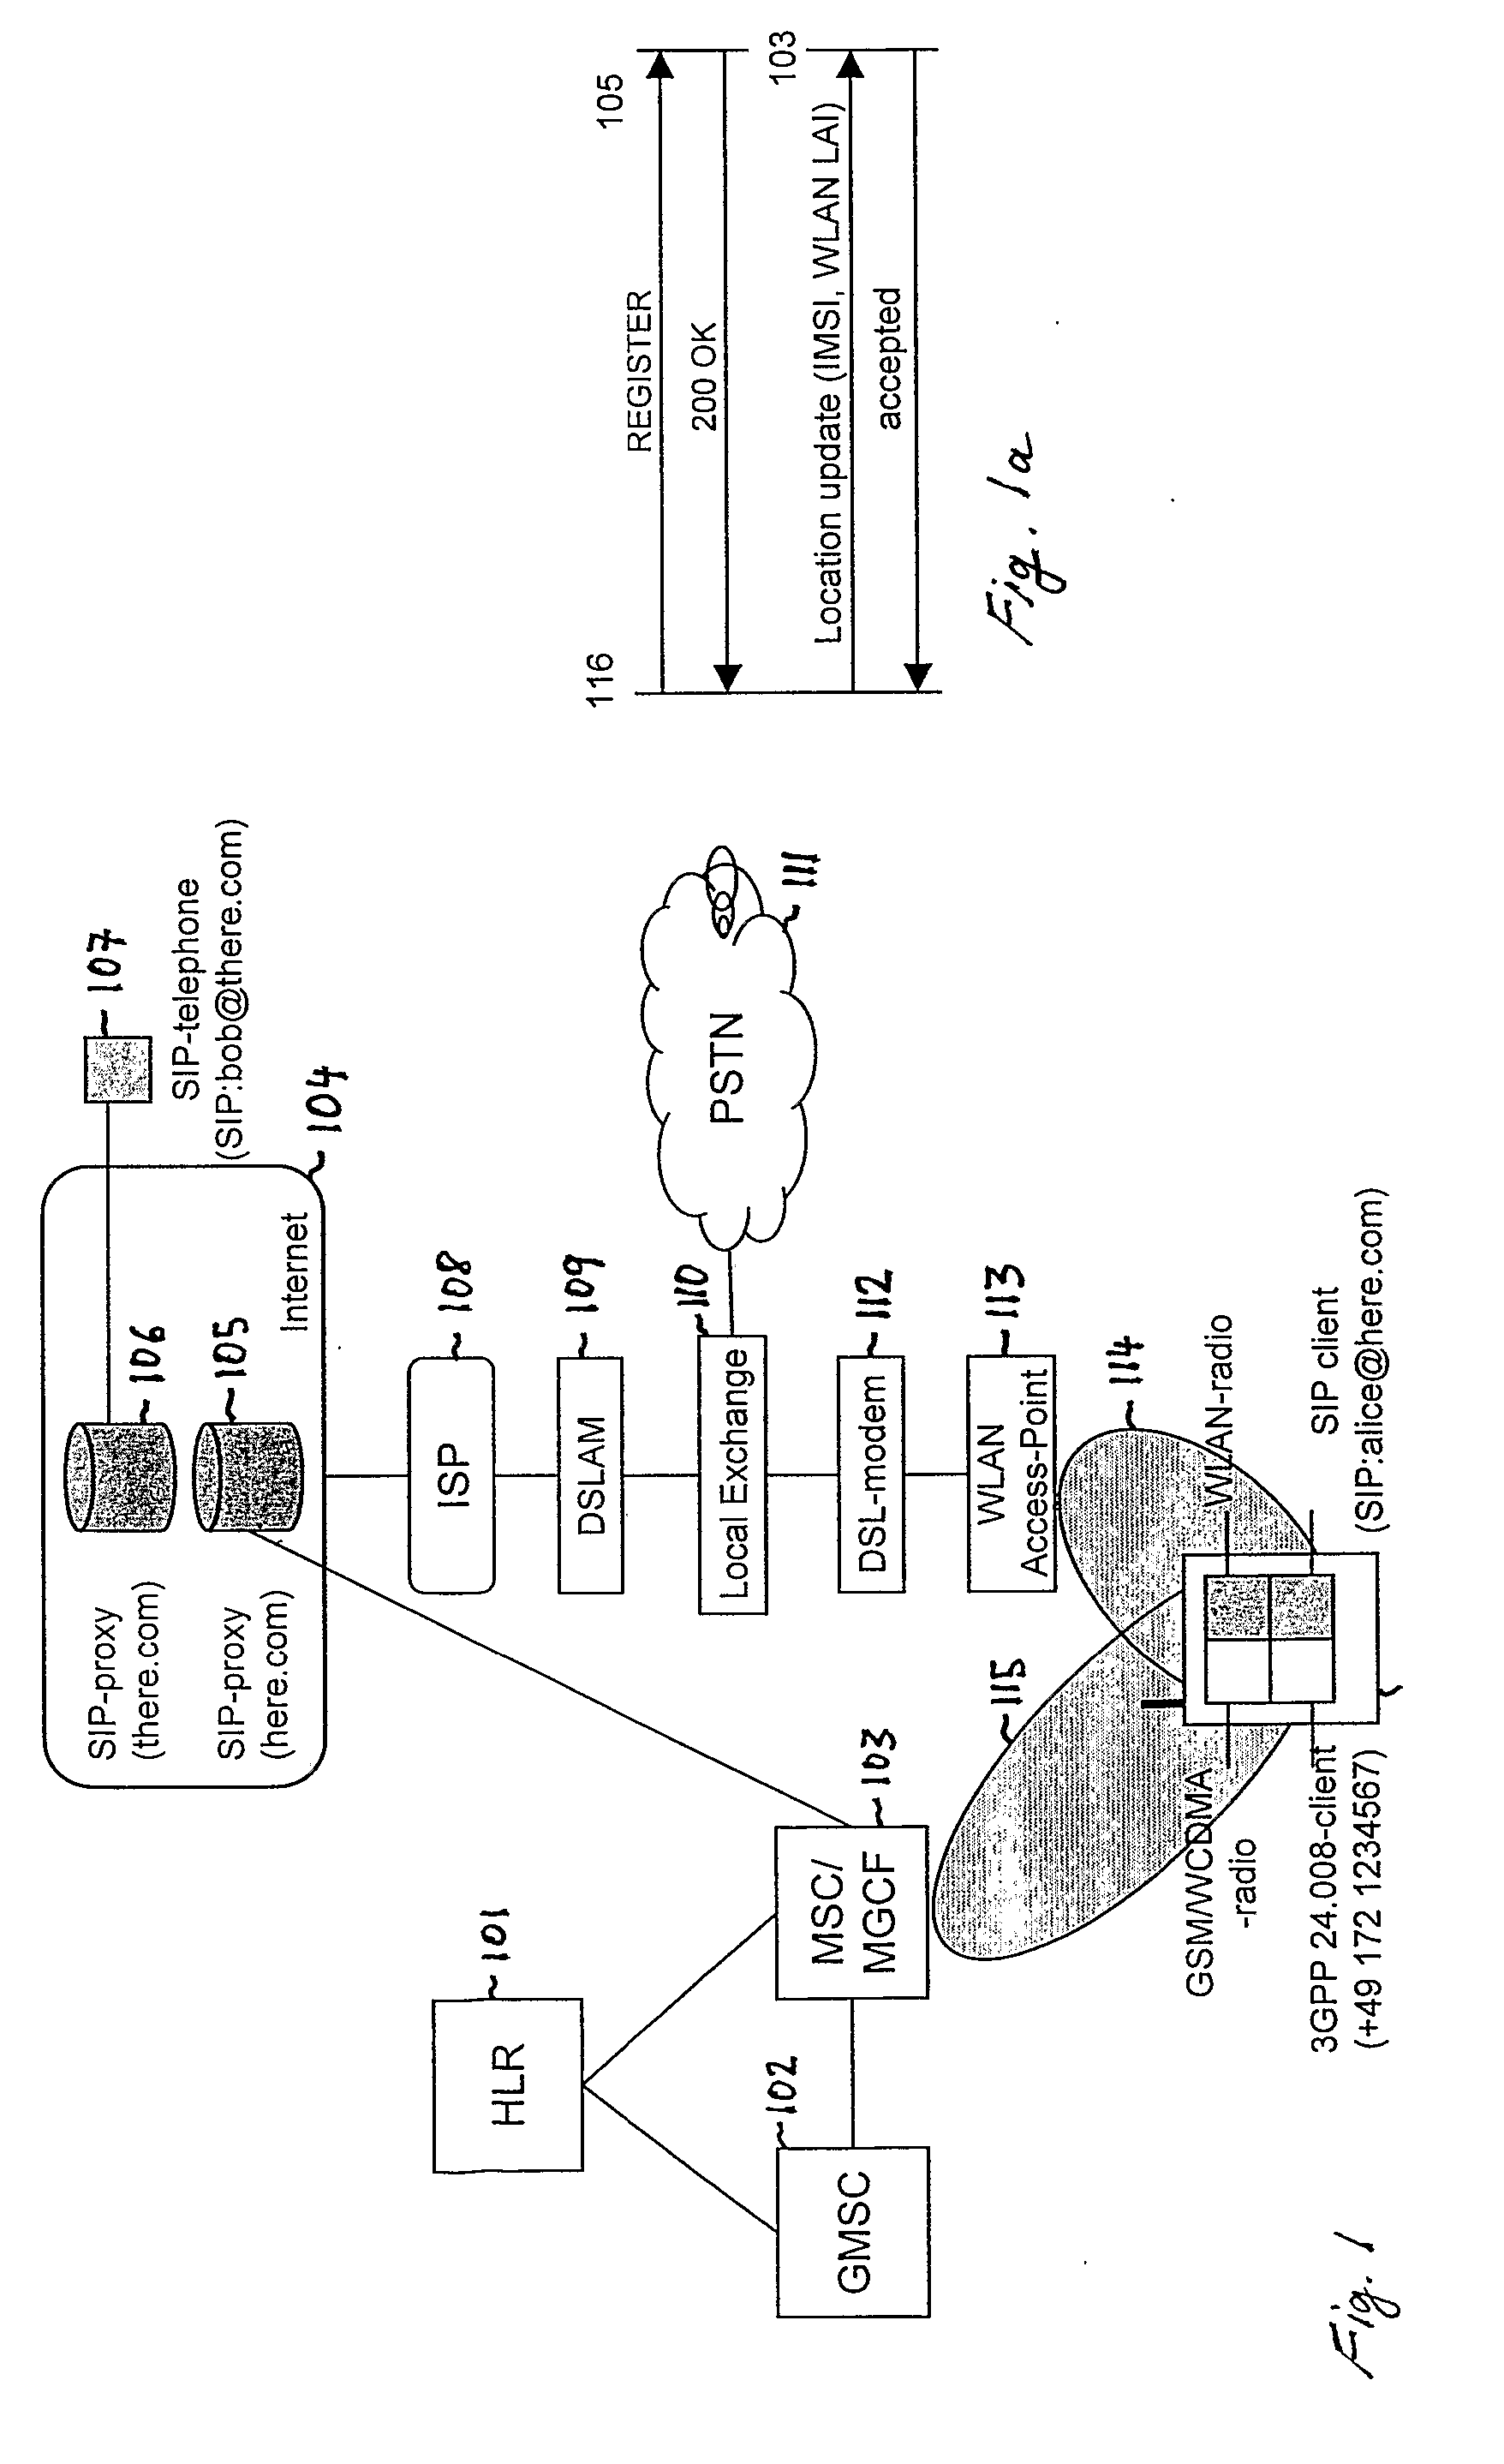 Operating And Supporting Dual Mode User Equipment